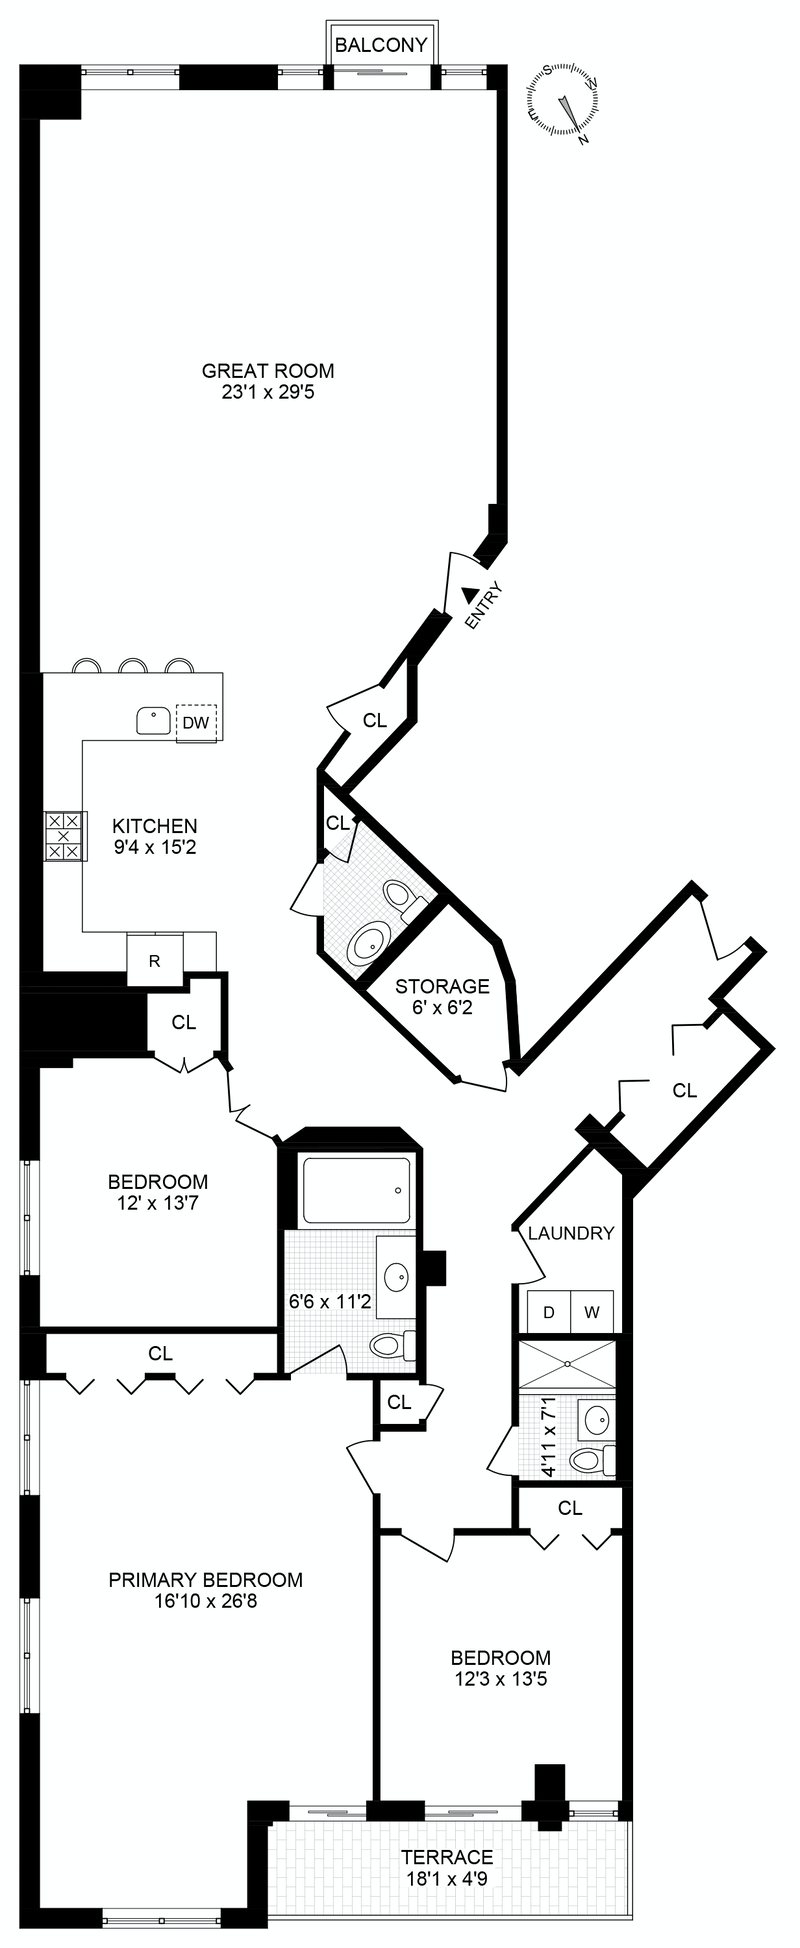 Floorplan for 121 Sterling Place, 2B